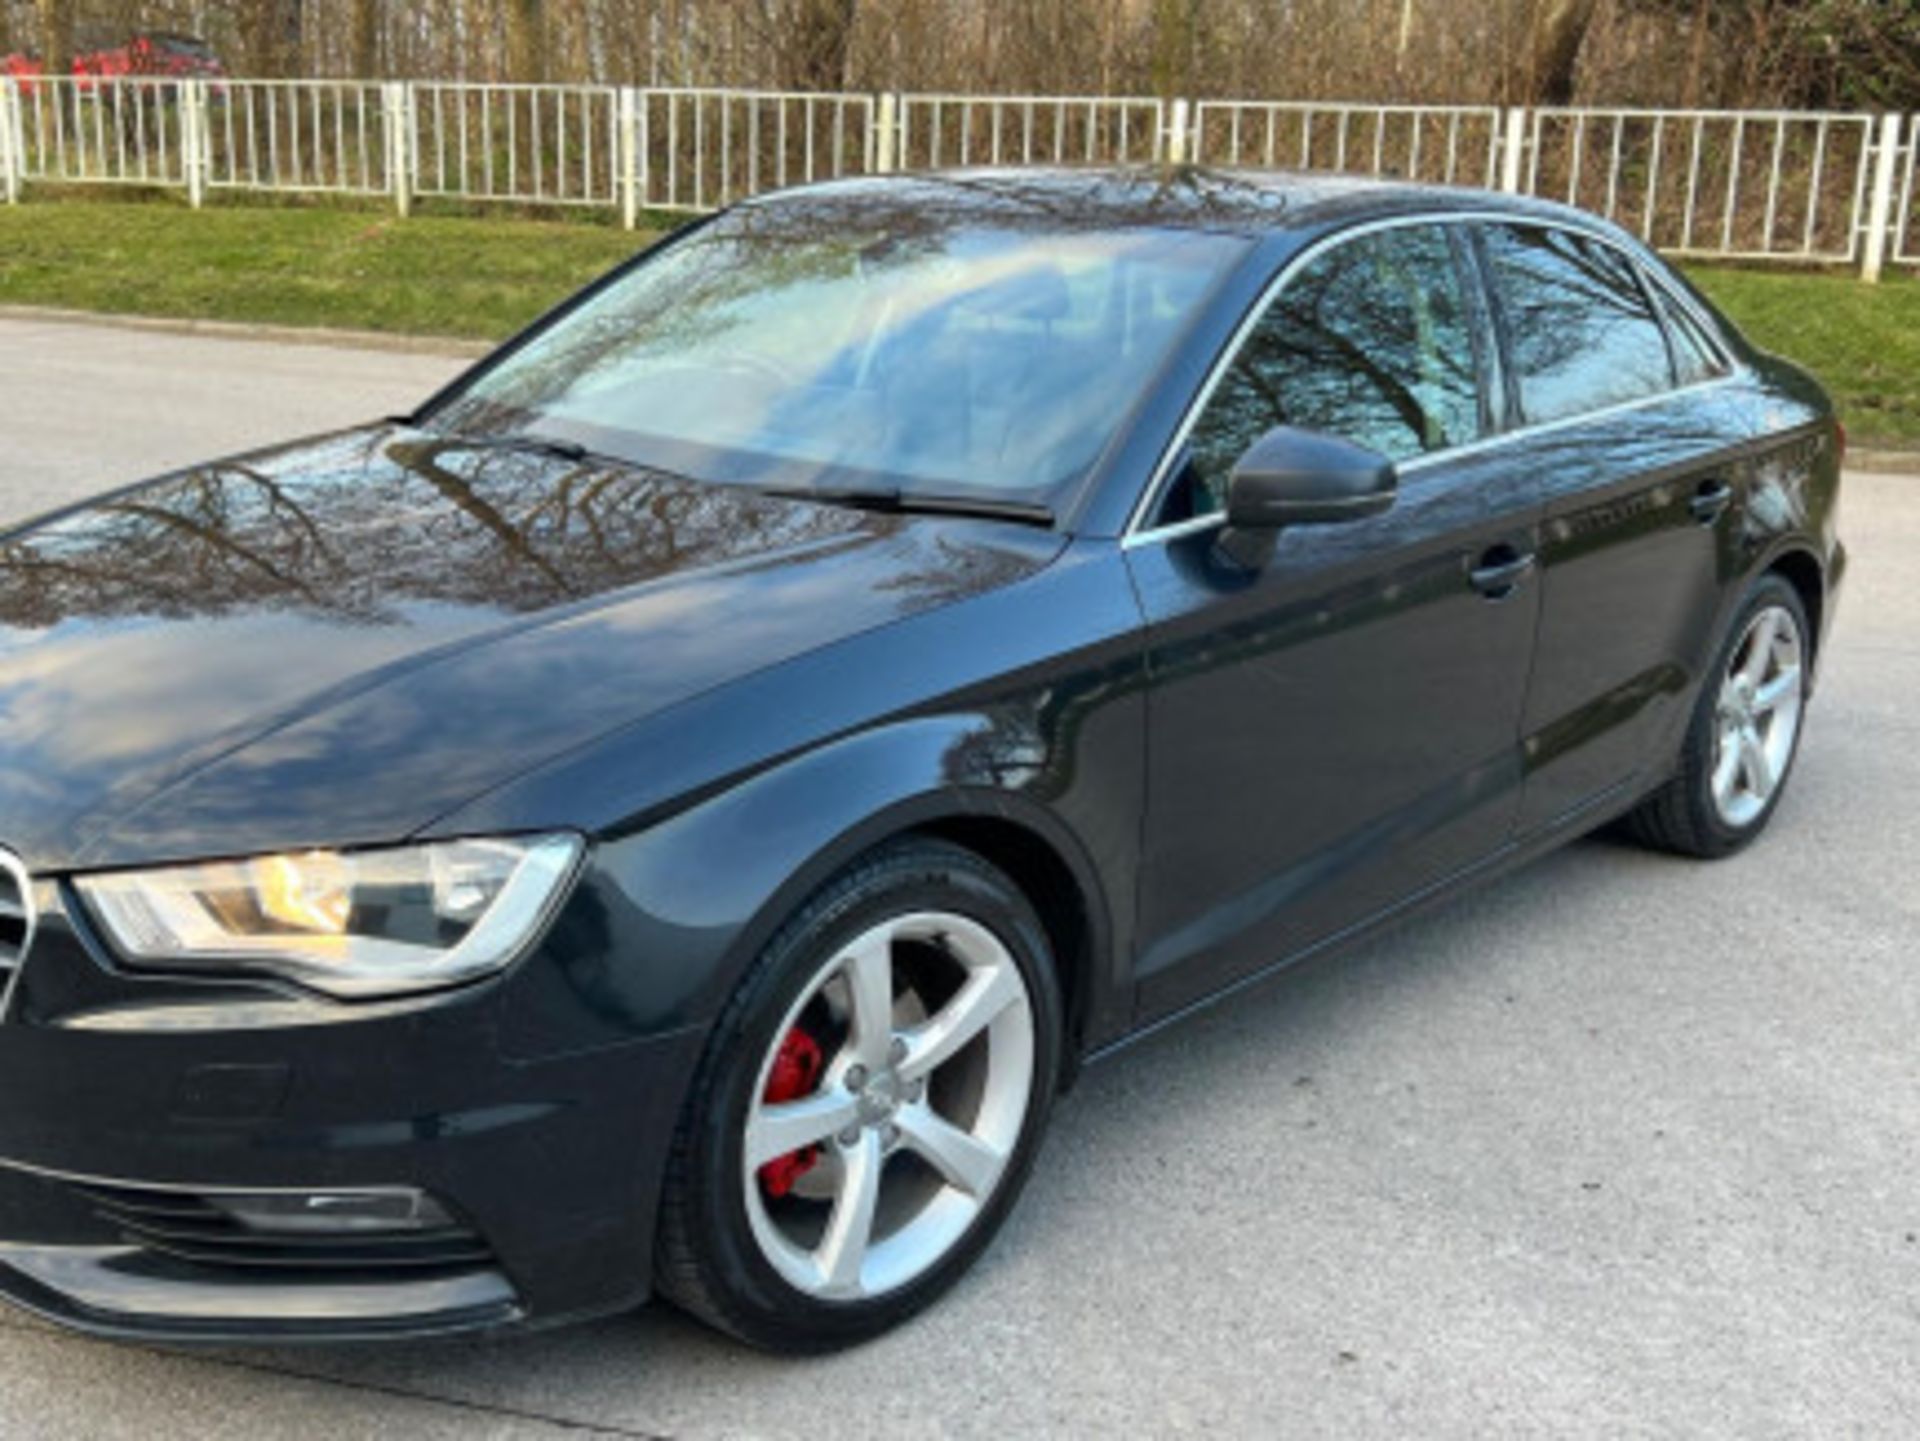 AUDI A3 2.0TDI SPORTBACK - STYLE, PERFORMANCE, AND COMFORT COMBINED >>--NO VAT ON HAMMER--<< - Image 8 of 216